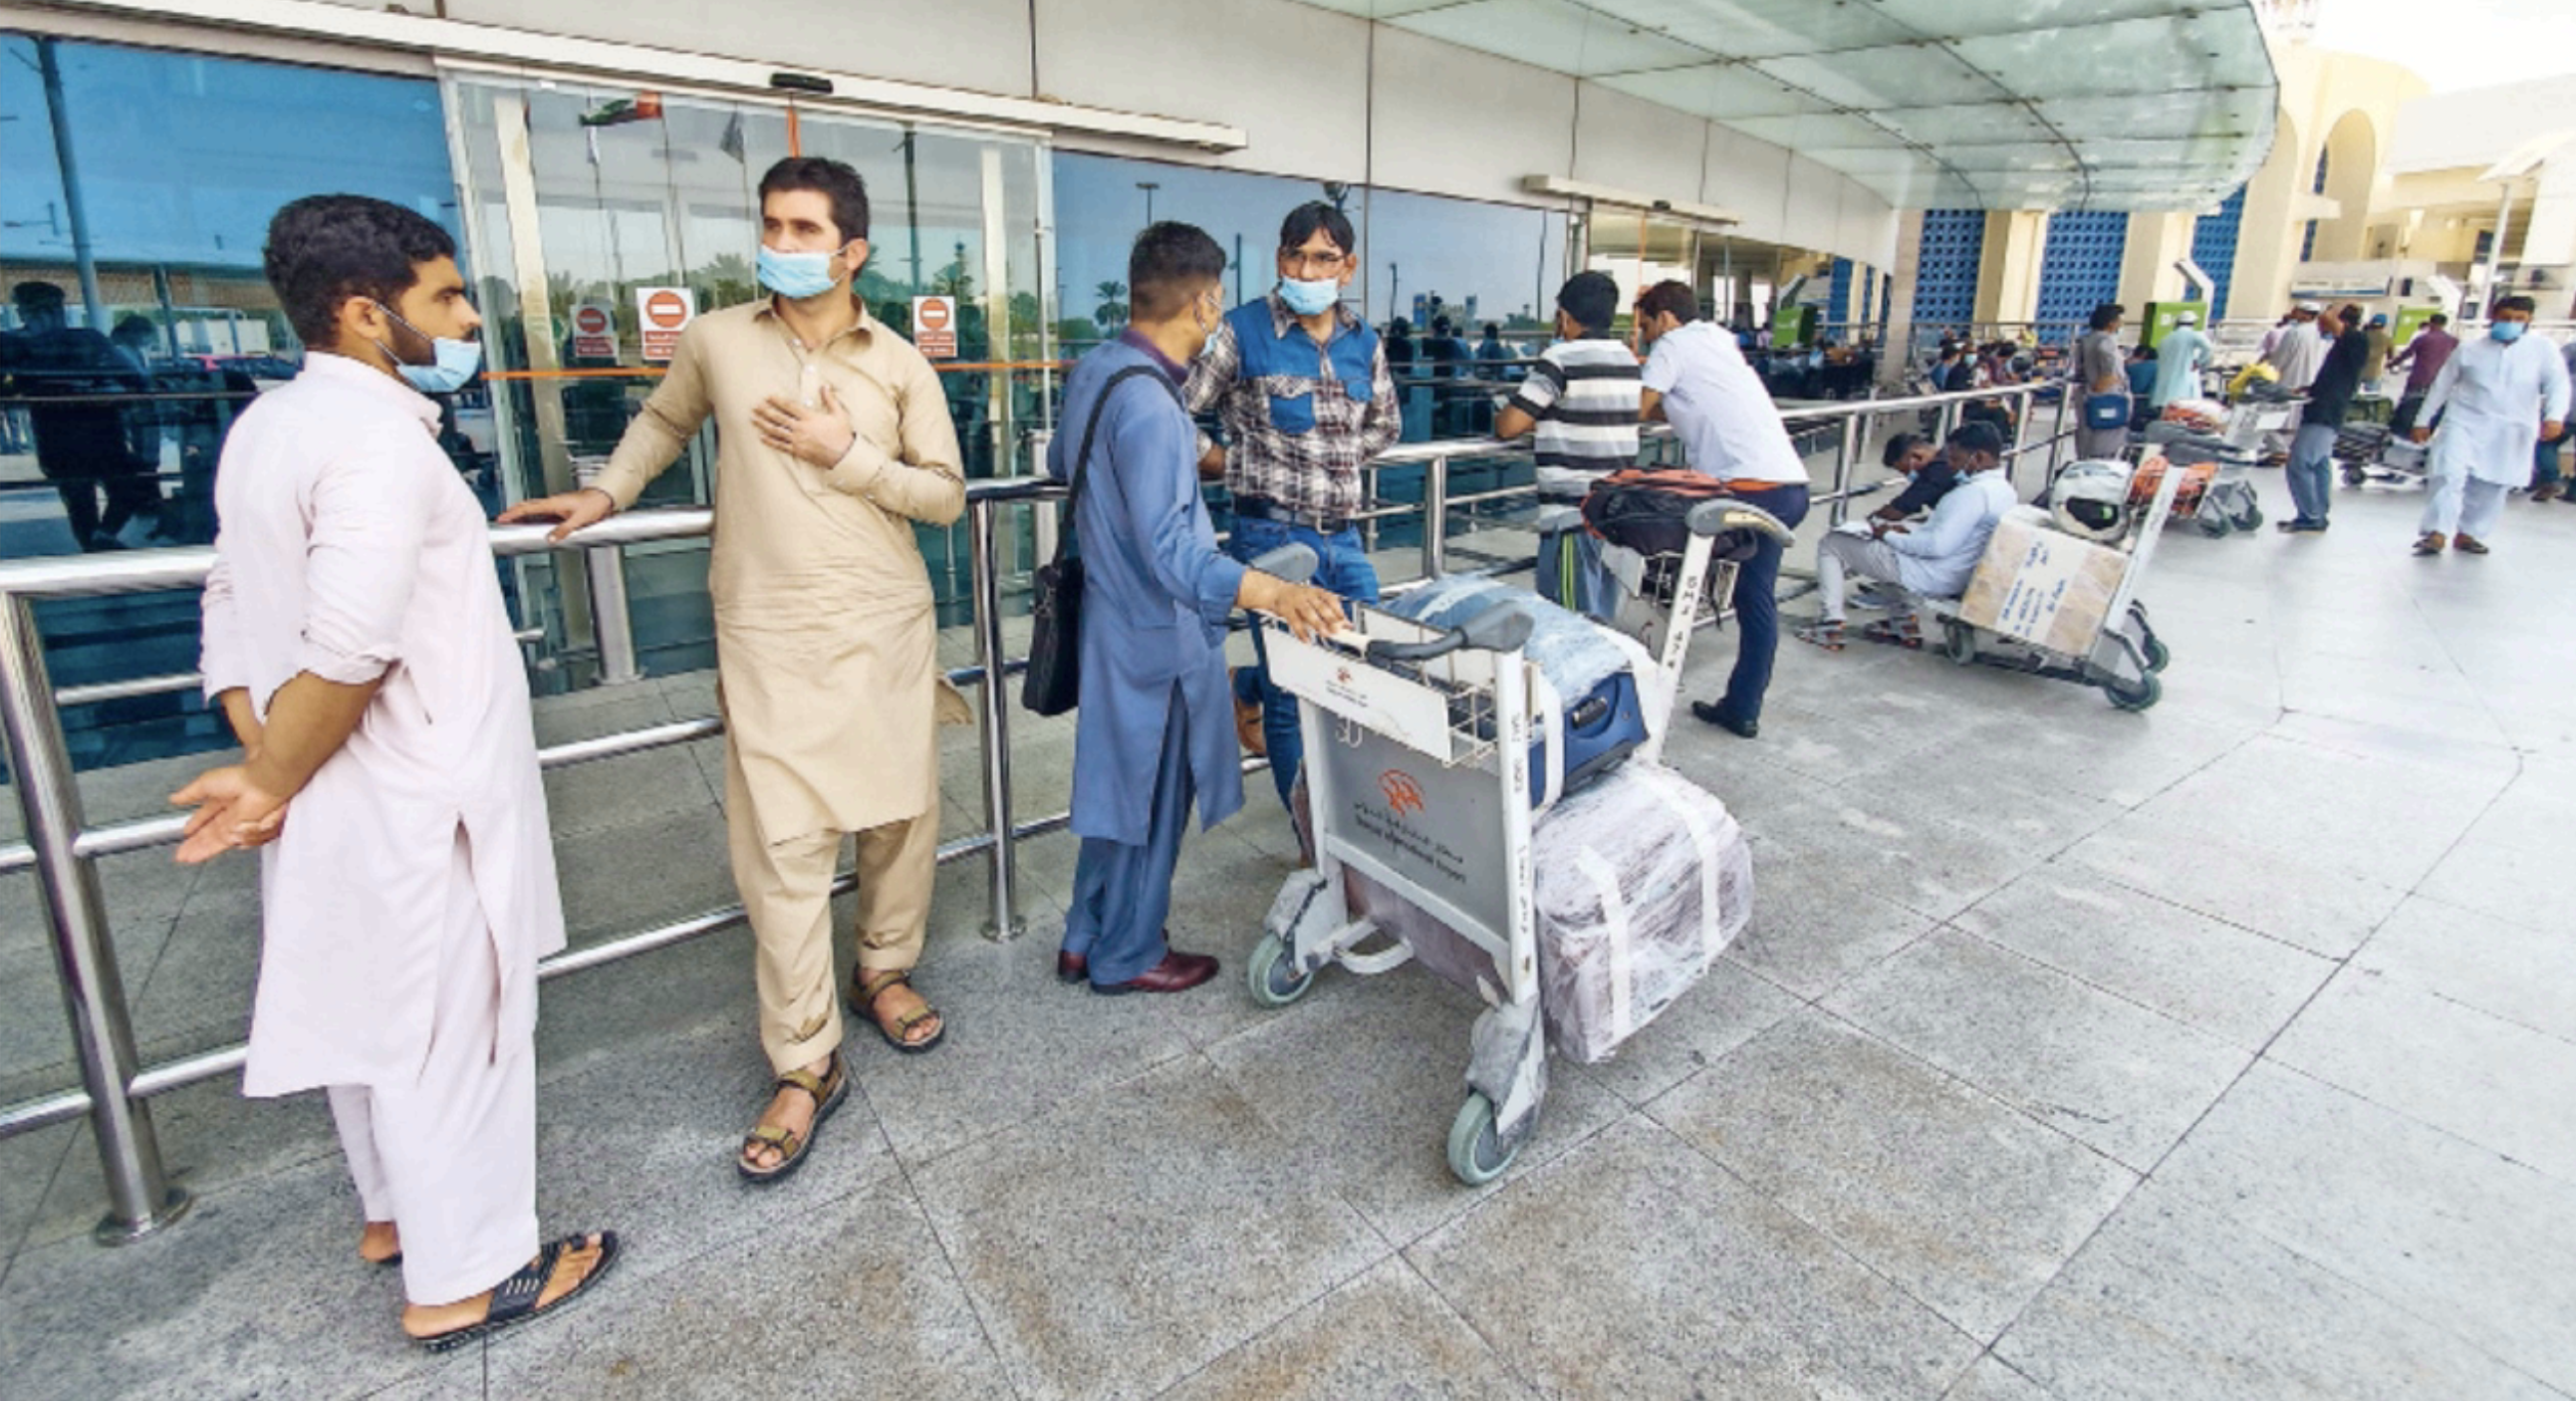 Pakistan-UAE flights: Covid vaccine certificate certification is “not required at this time”-News